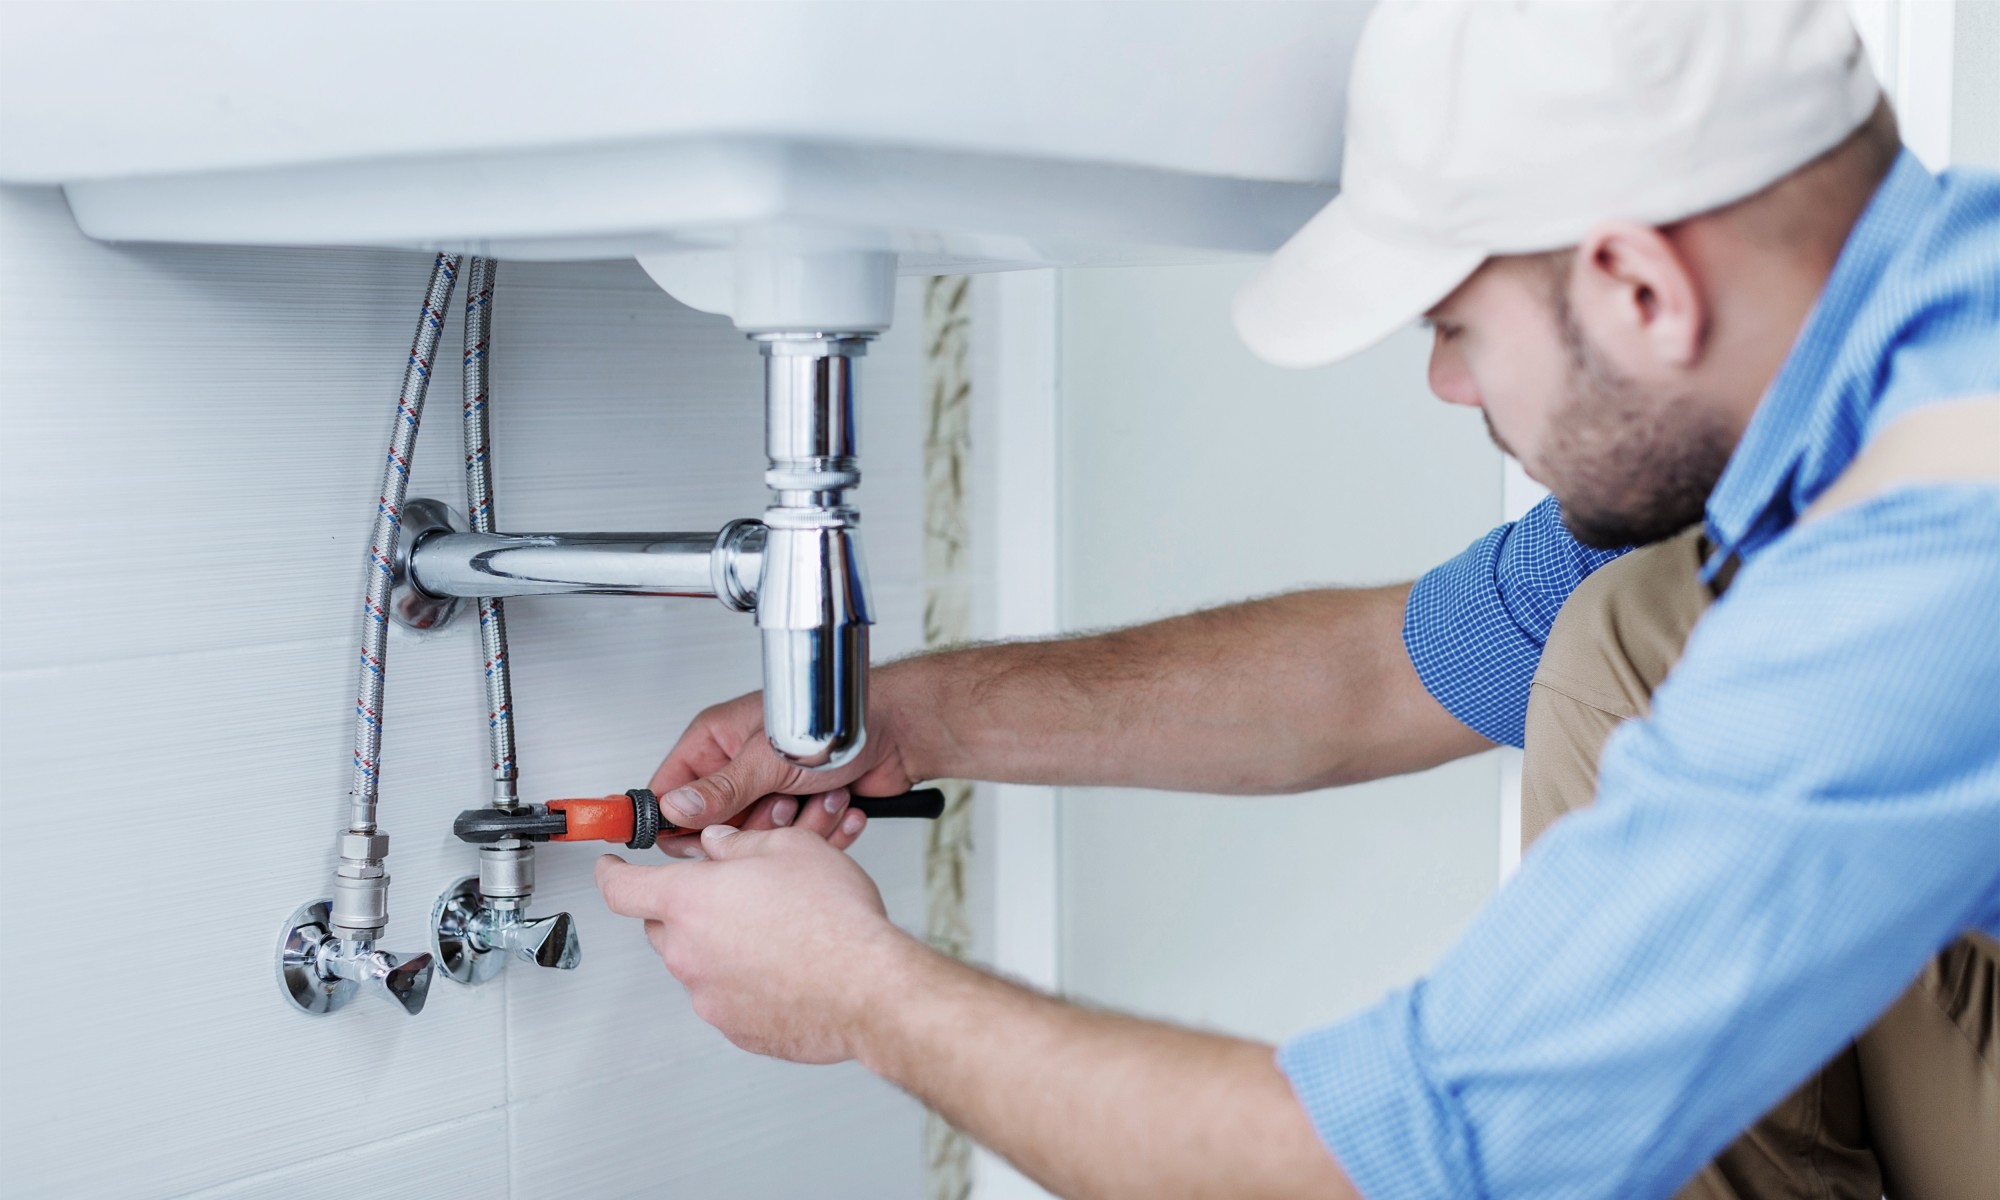 Home plumbing issues spring up from time to time. Read on for a few common plumbing issues along with a guide on how to fix them.